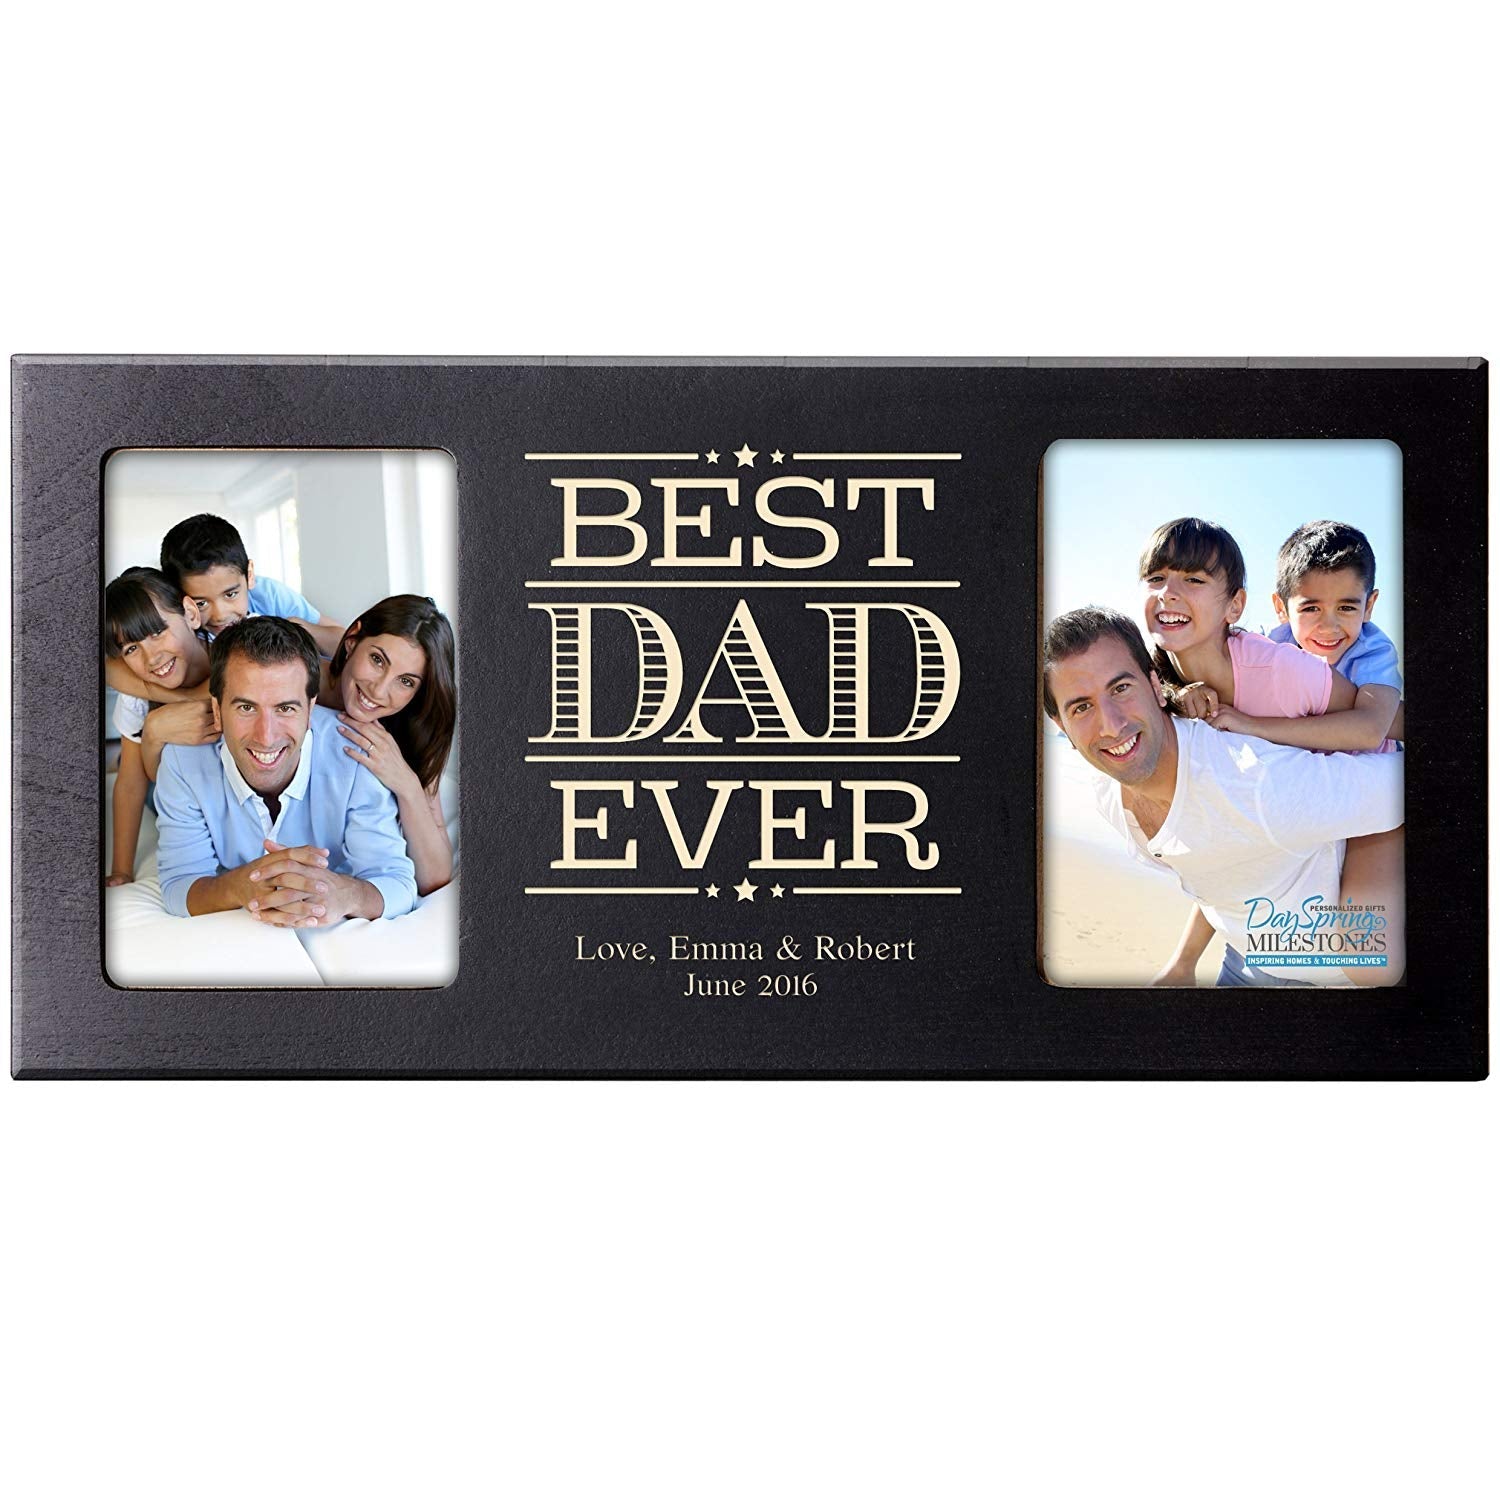 We Love You Dad Personalized Acrylic Plaque Gift for Father - Best Custom